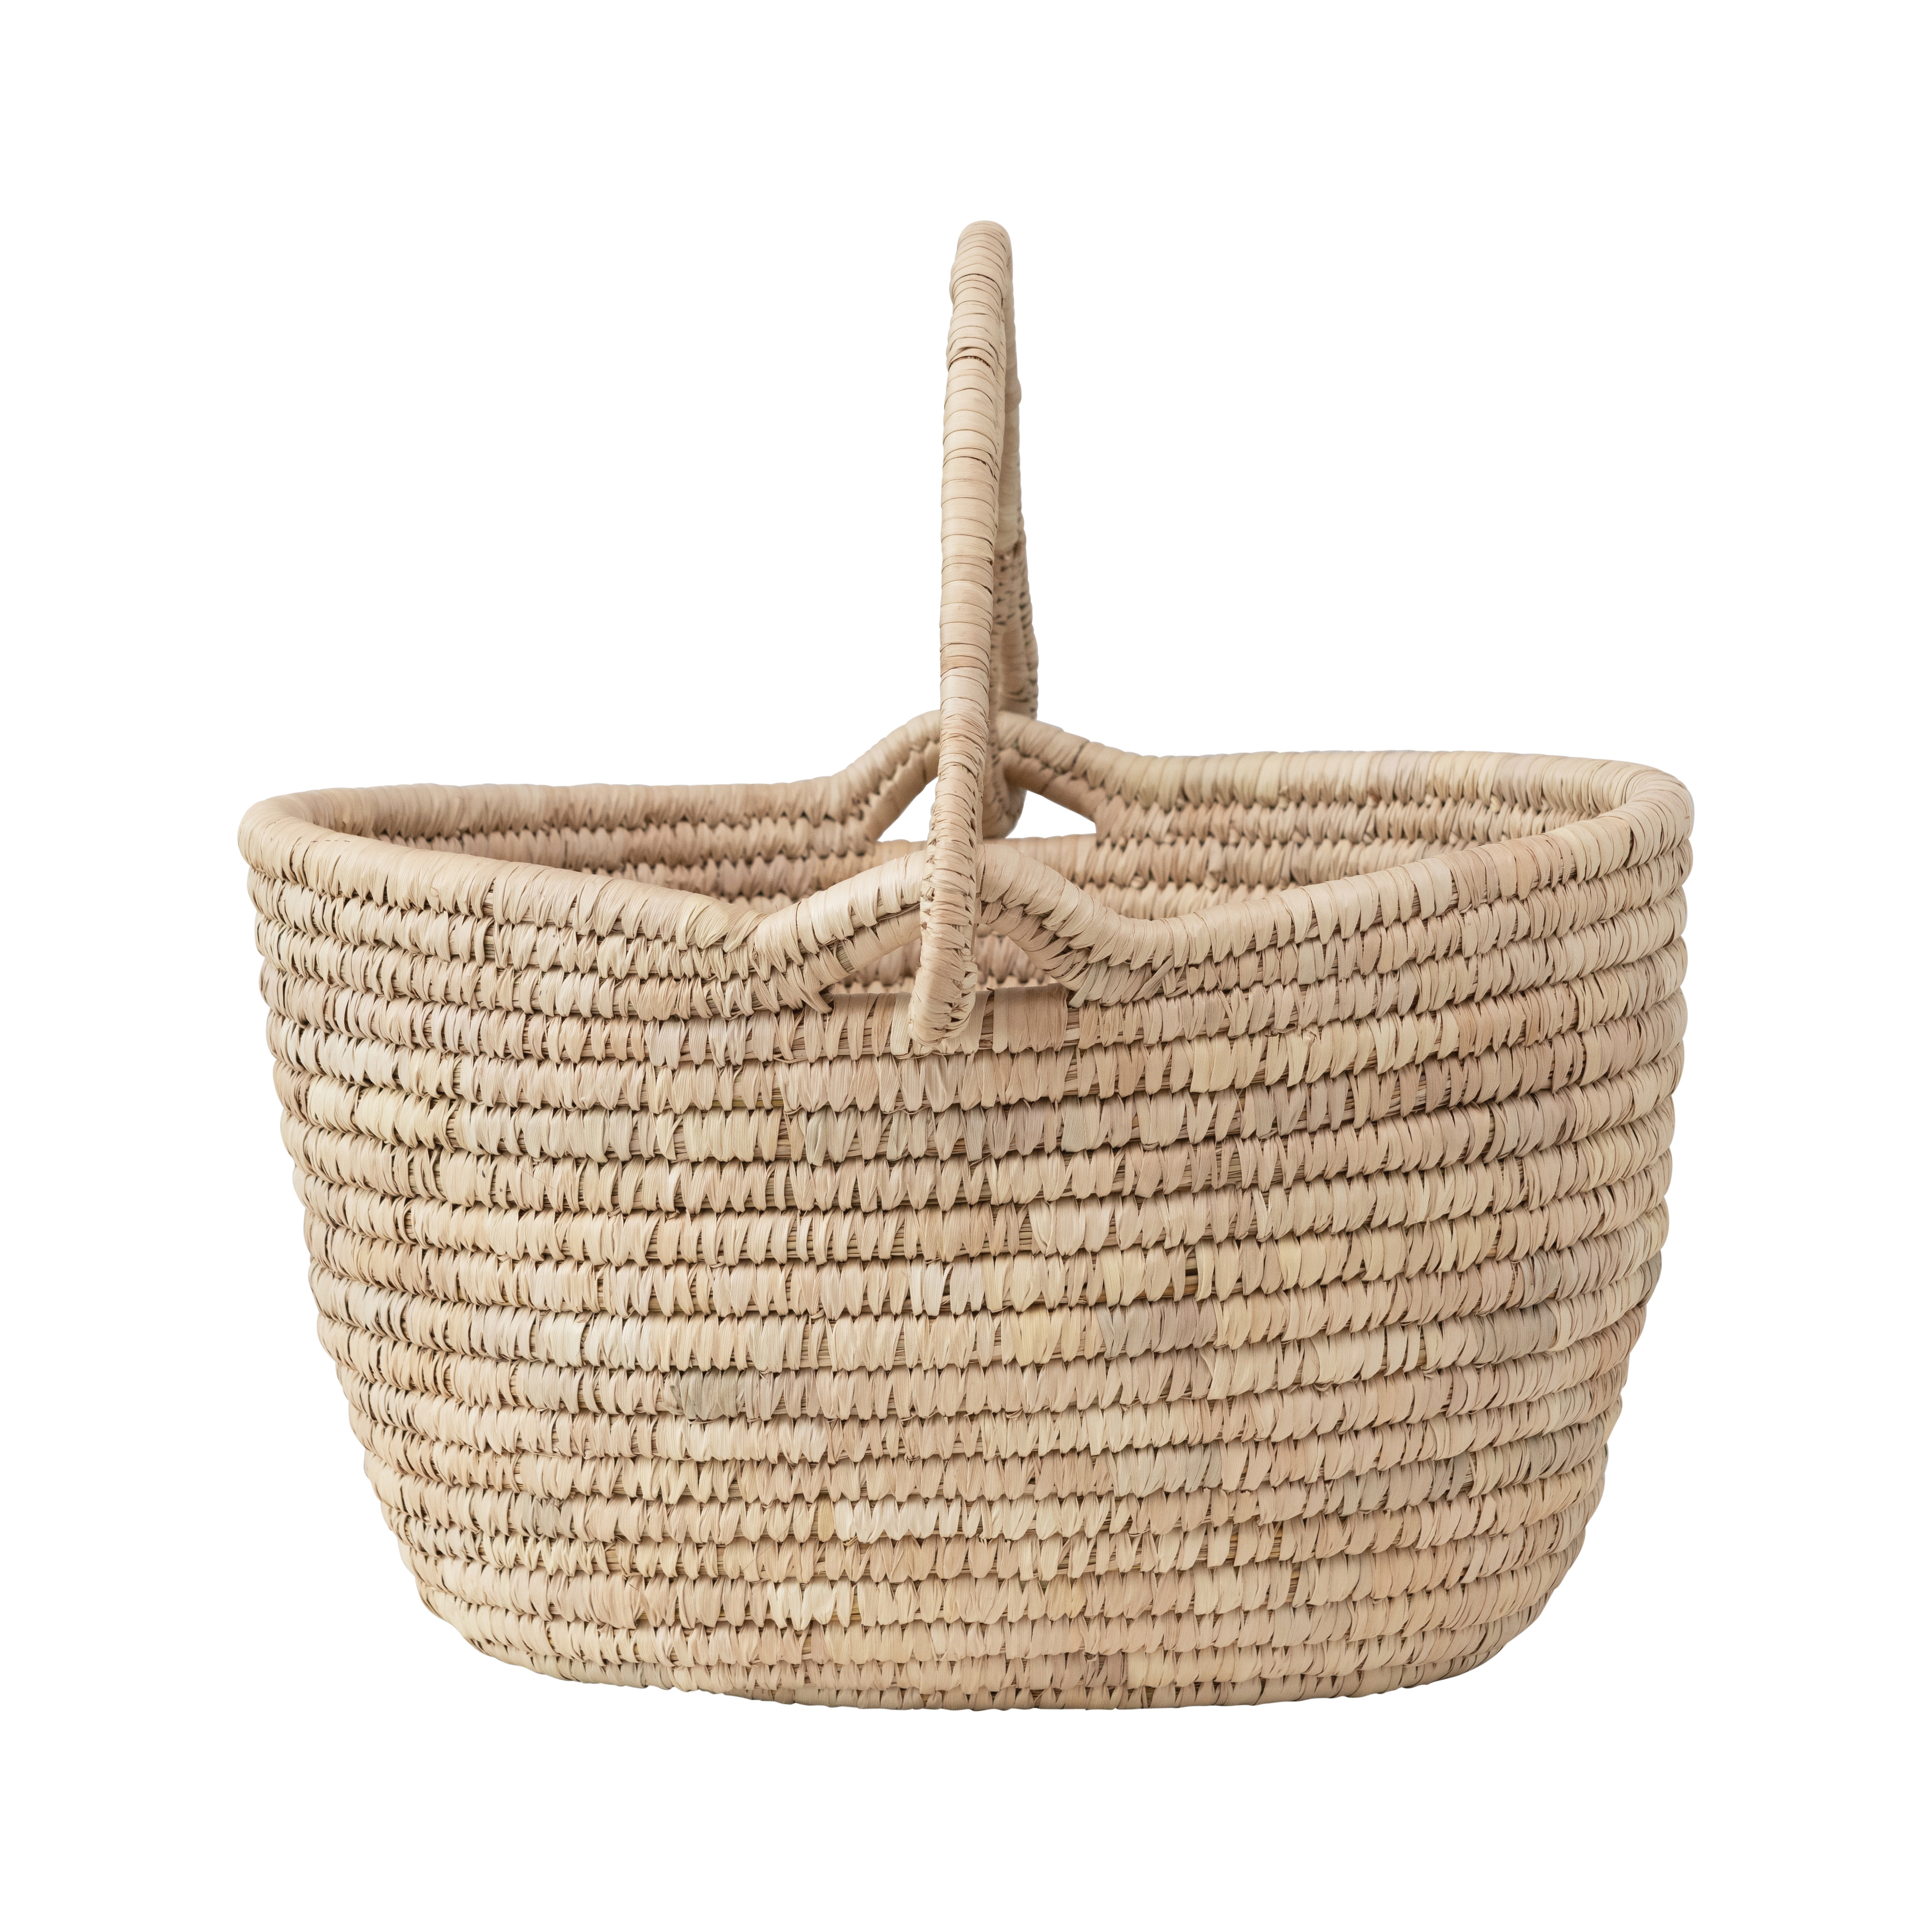 Hand-Woven Grass and Date Leaf Basket with Handle - Image 1